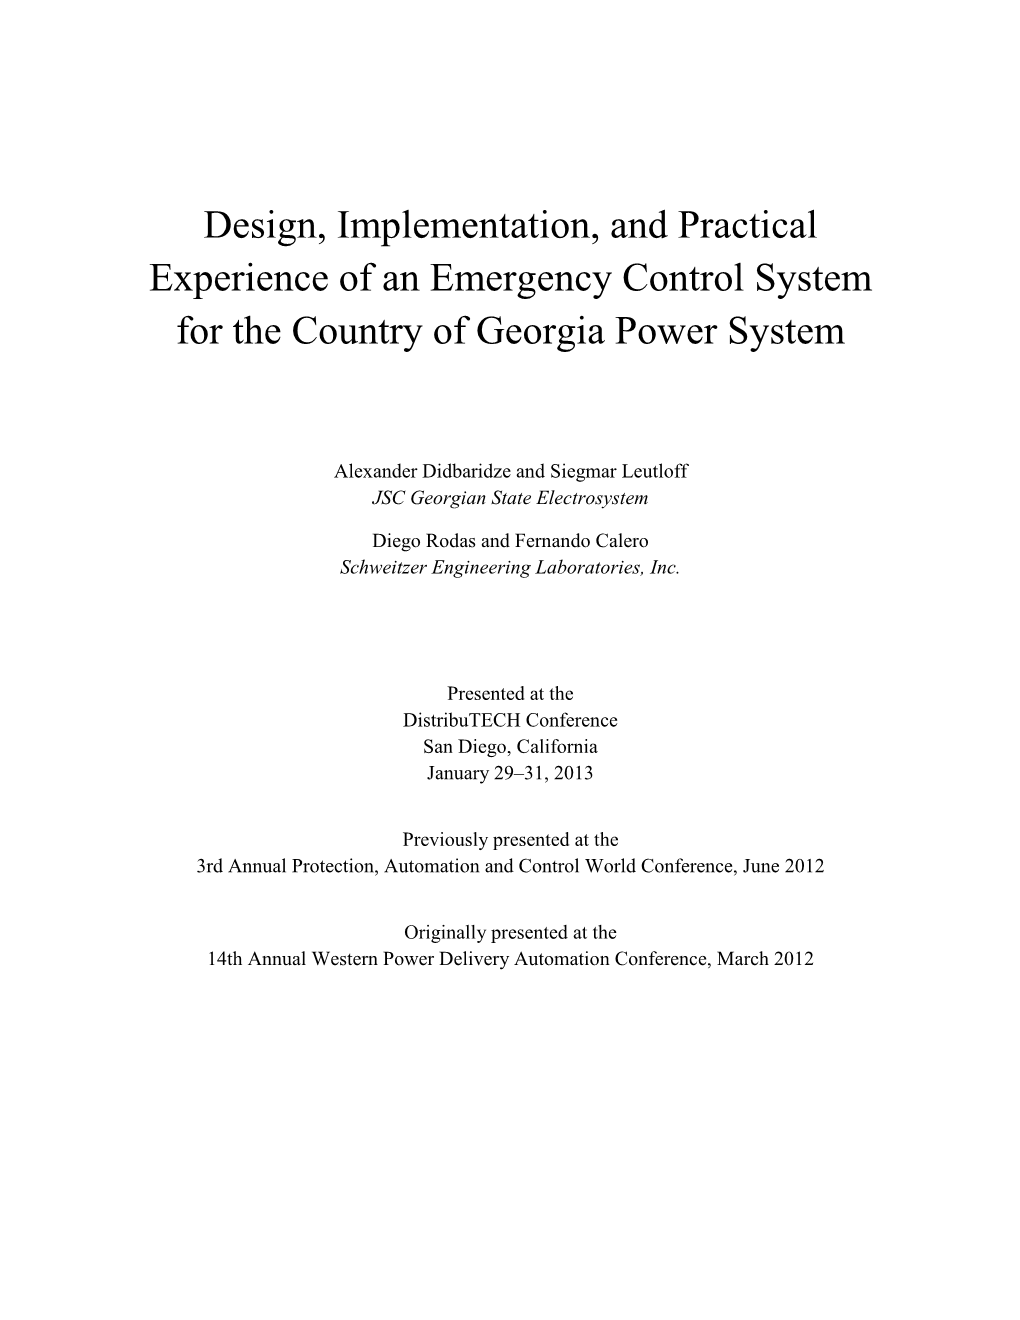 Design, Implementation, and Practical Experience of an Emergency Control System for the Country of Georgia Power System